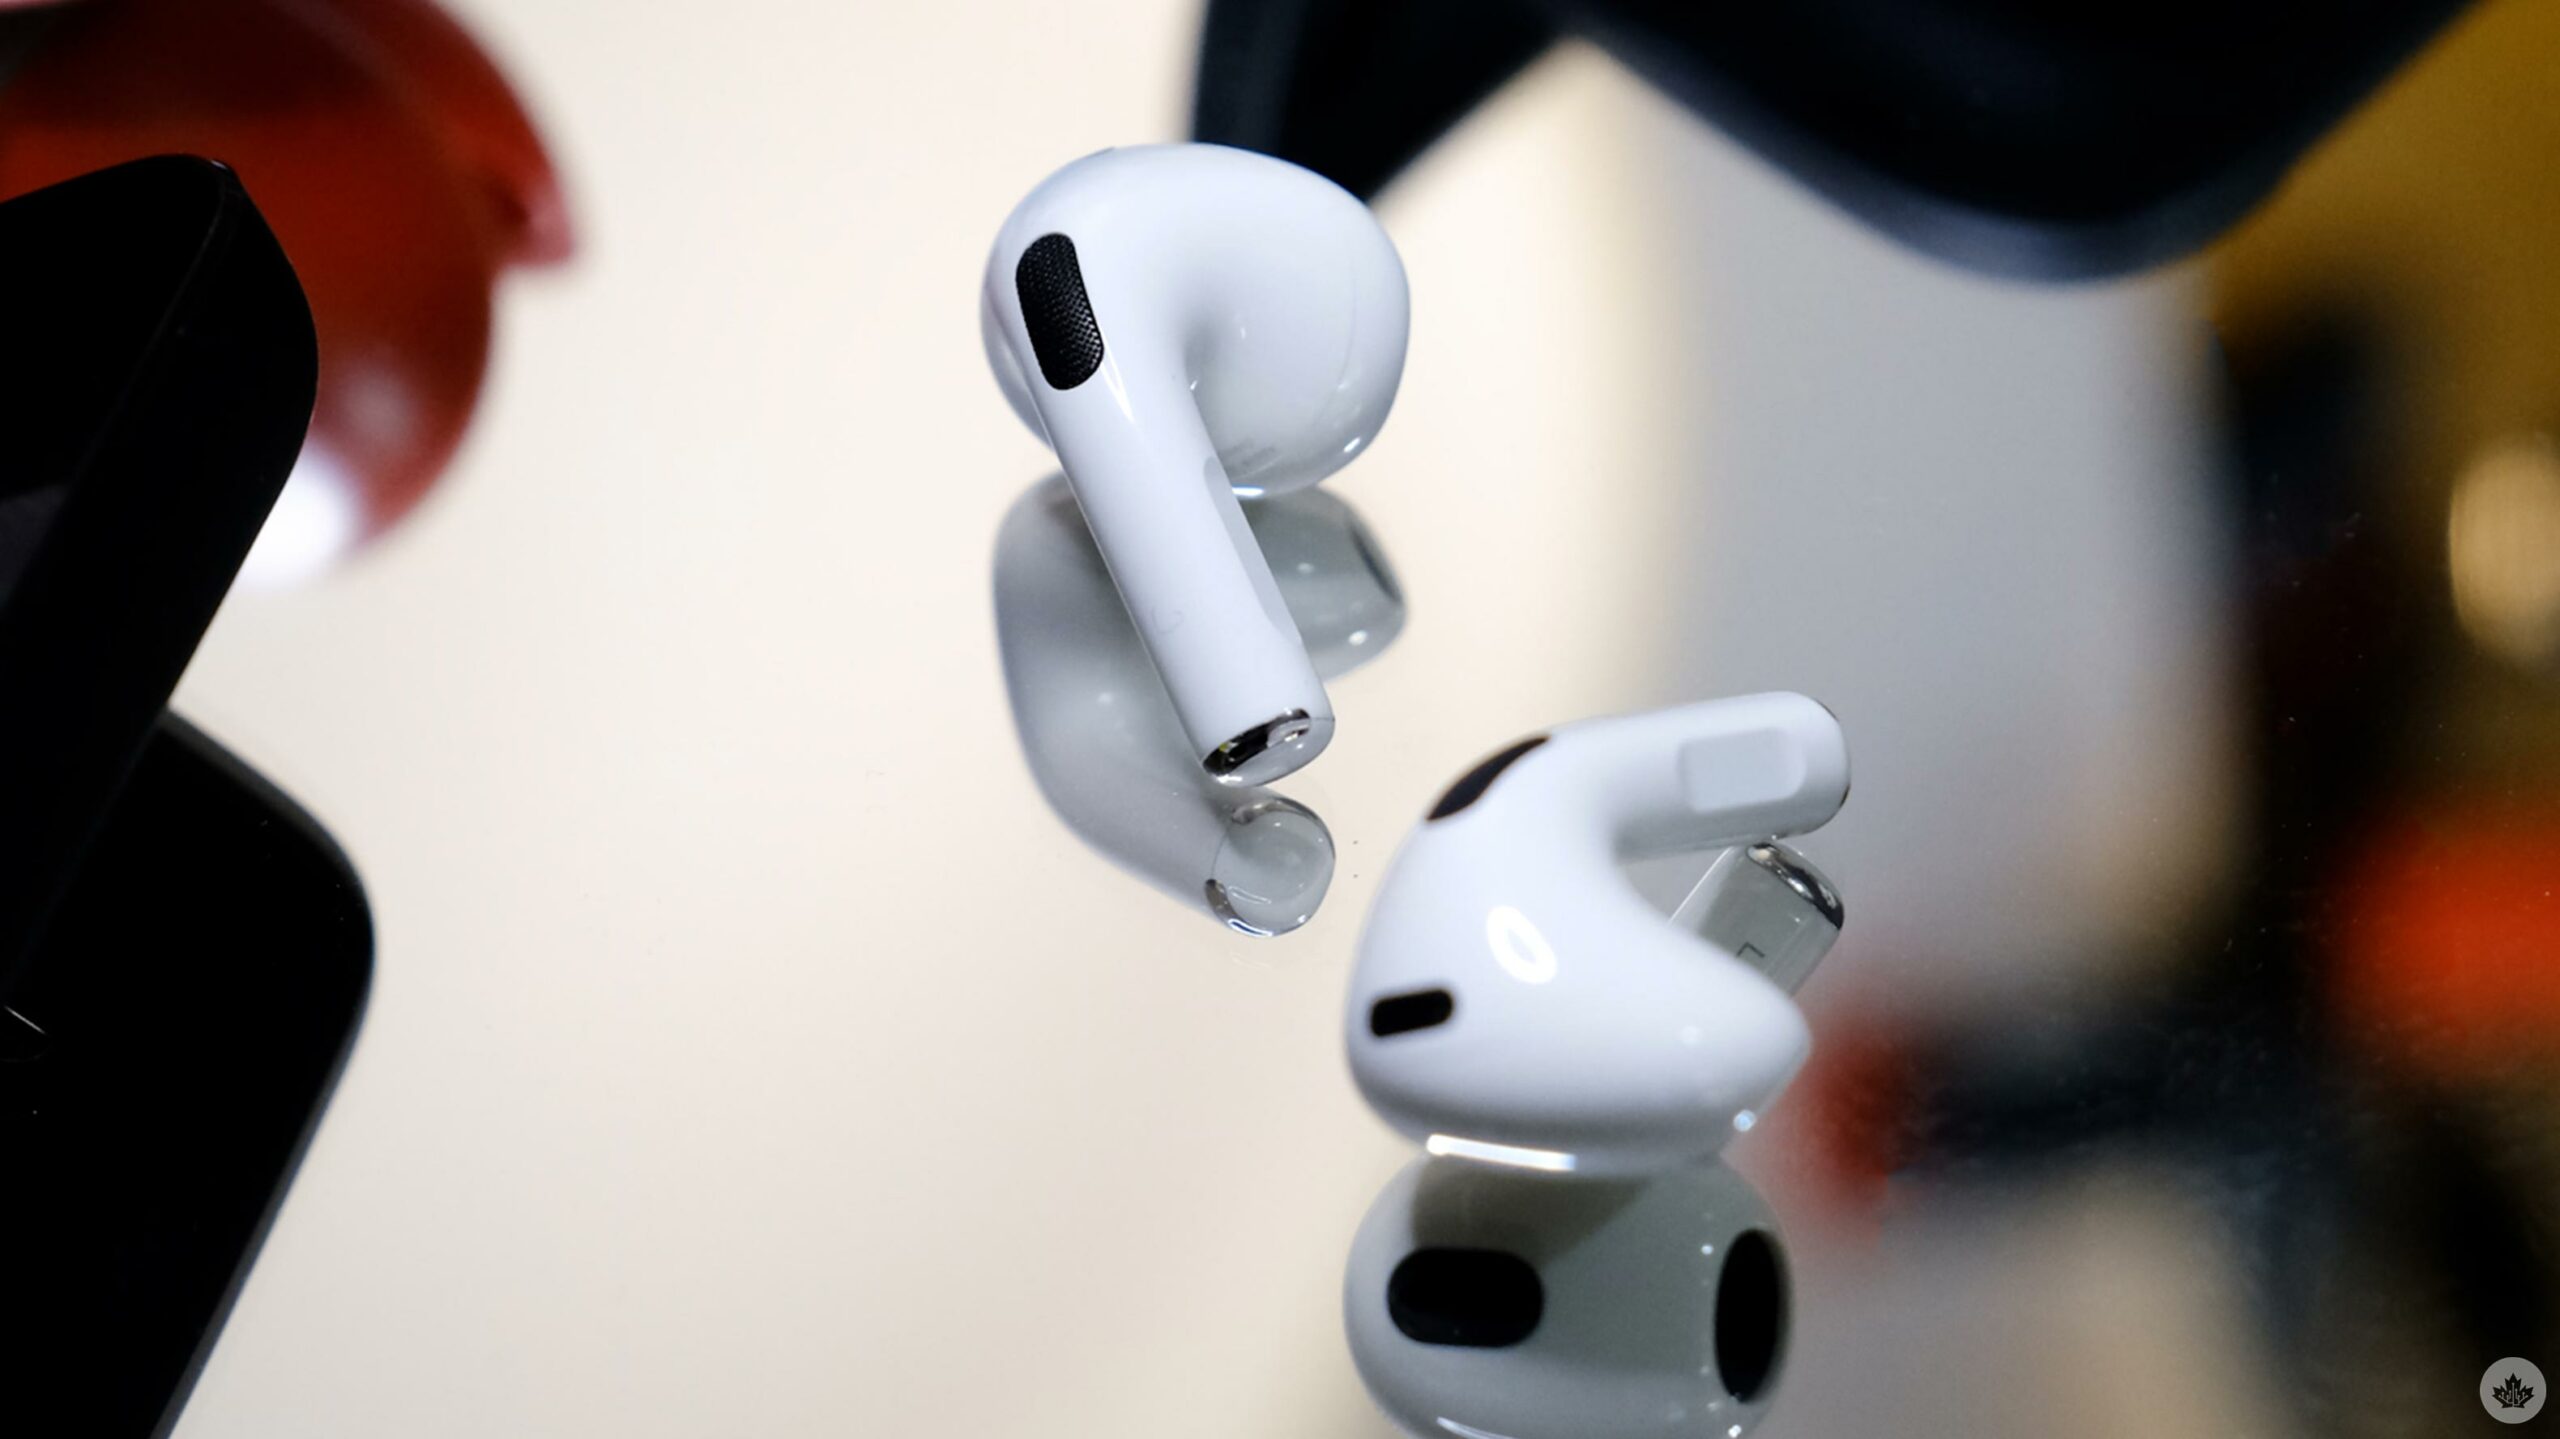 Apple's AirPods and AirPods Pro on sale on Amazon Canada